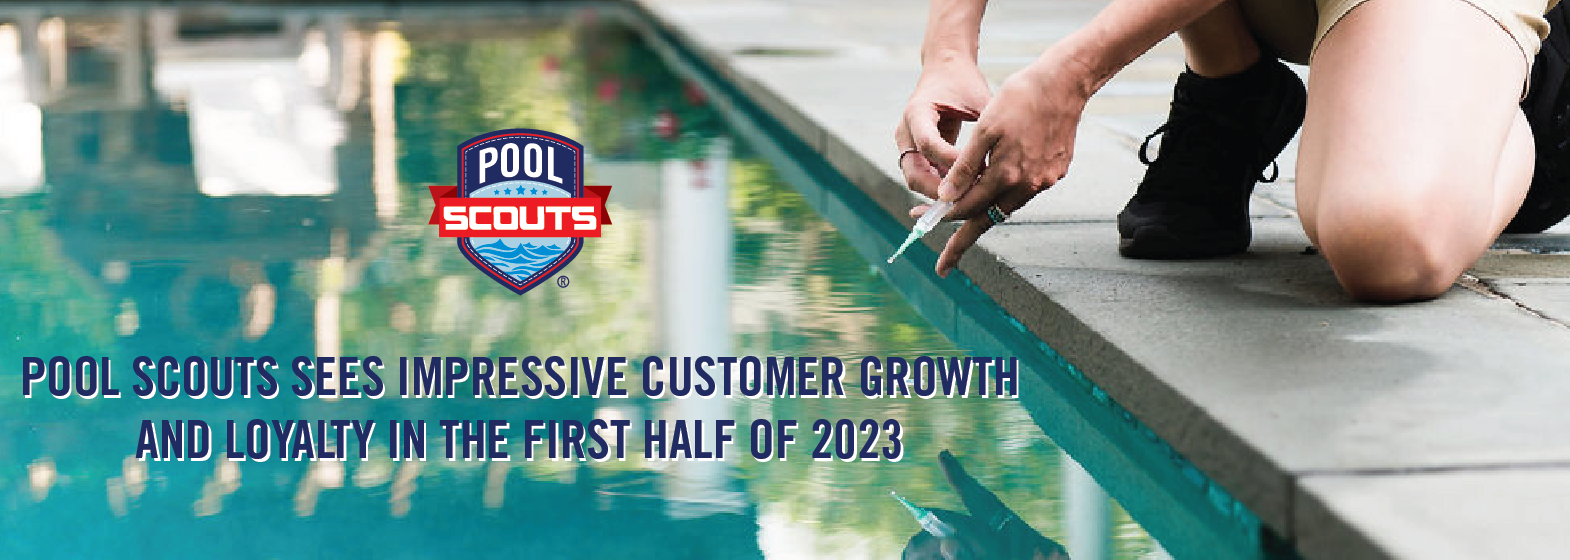 Pool Scouts Sees Impressive Customer Growth and Loyalty in the First Half of 2023